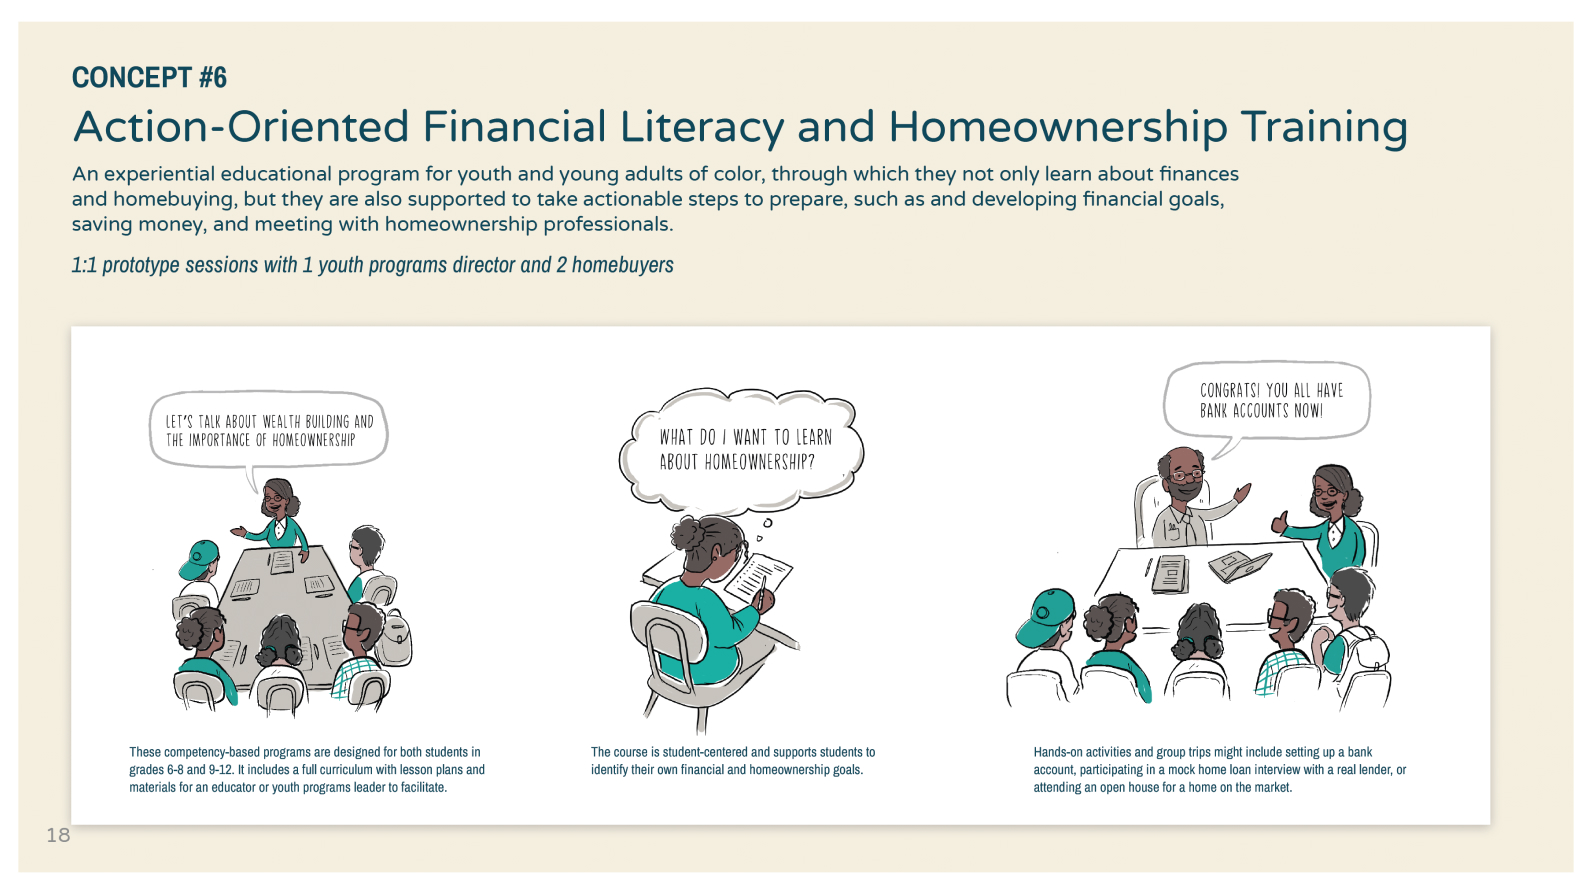 Series of 3 sketches showing people sitting around a table, a person writing on a worksheet, and a group sitting at a table smiling. Header text says "Concept #6: Action-Oriented Financial Literacy and Homeownership Training."